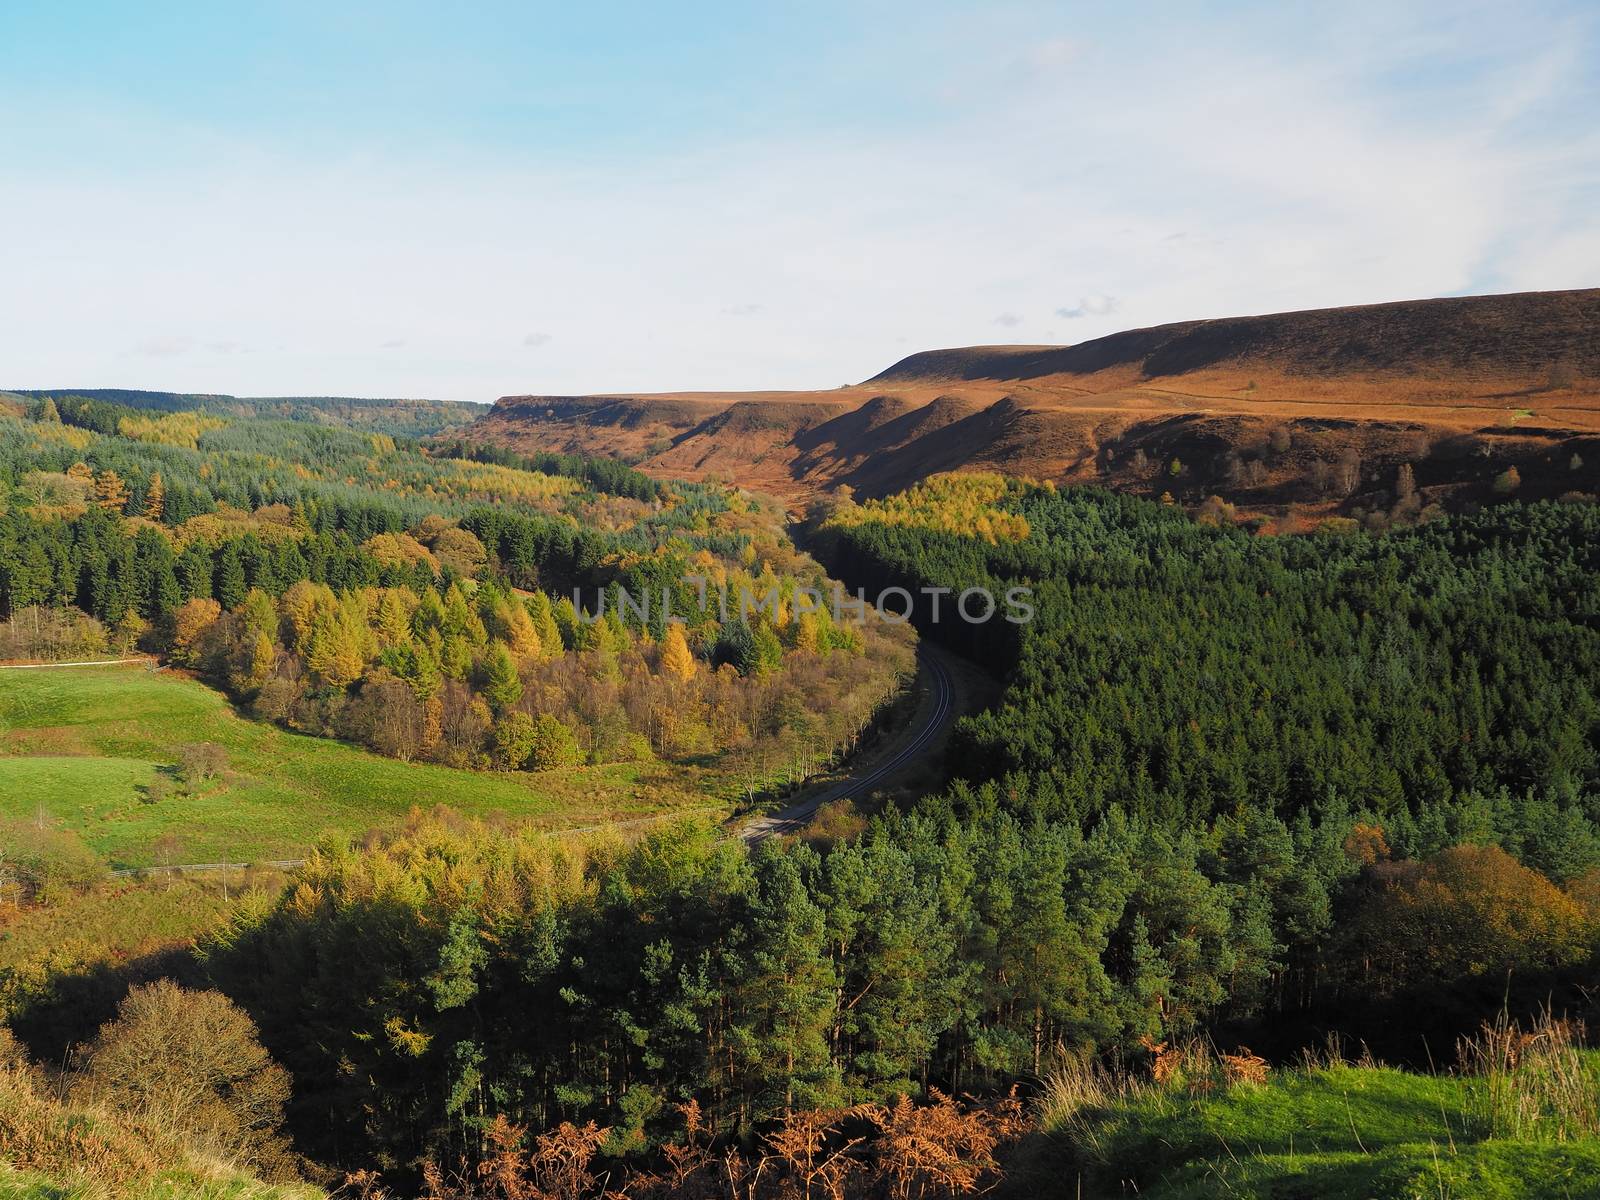 Railway winding its way through a wooded valley in Newtondale Forest, as seen from Skelton Tower, North York Moors National Park, Yorkshire, UK